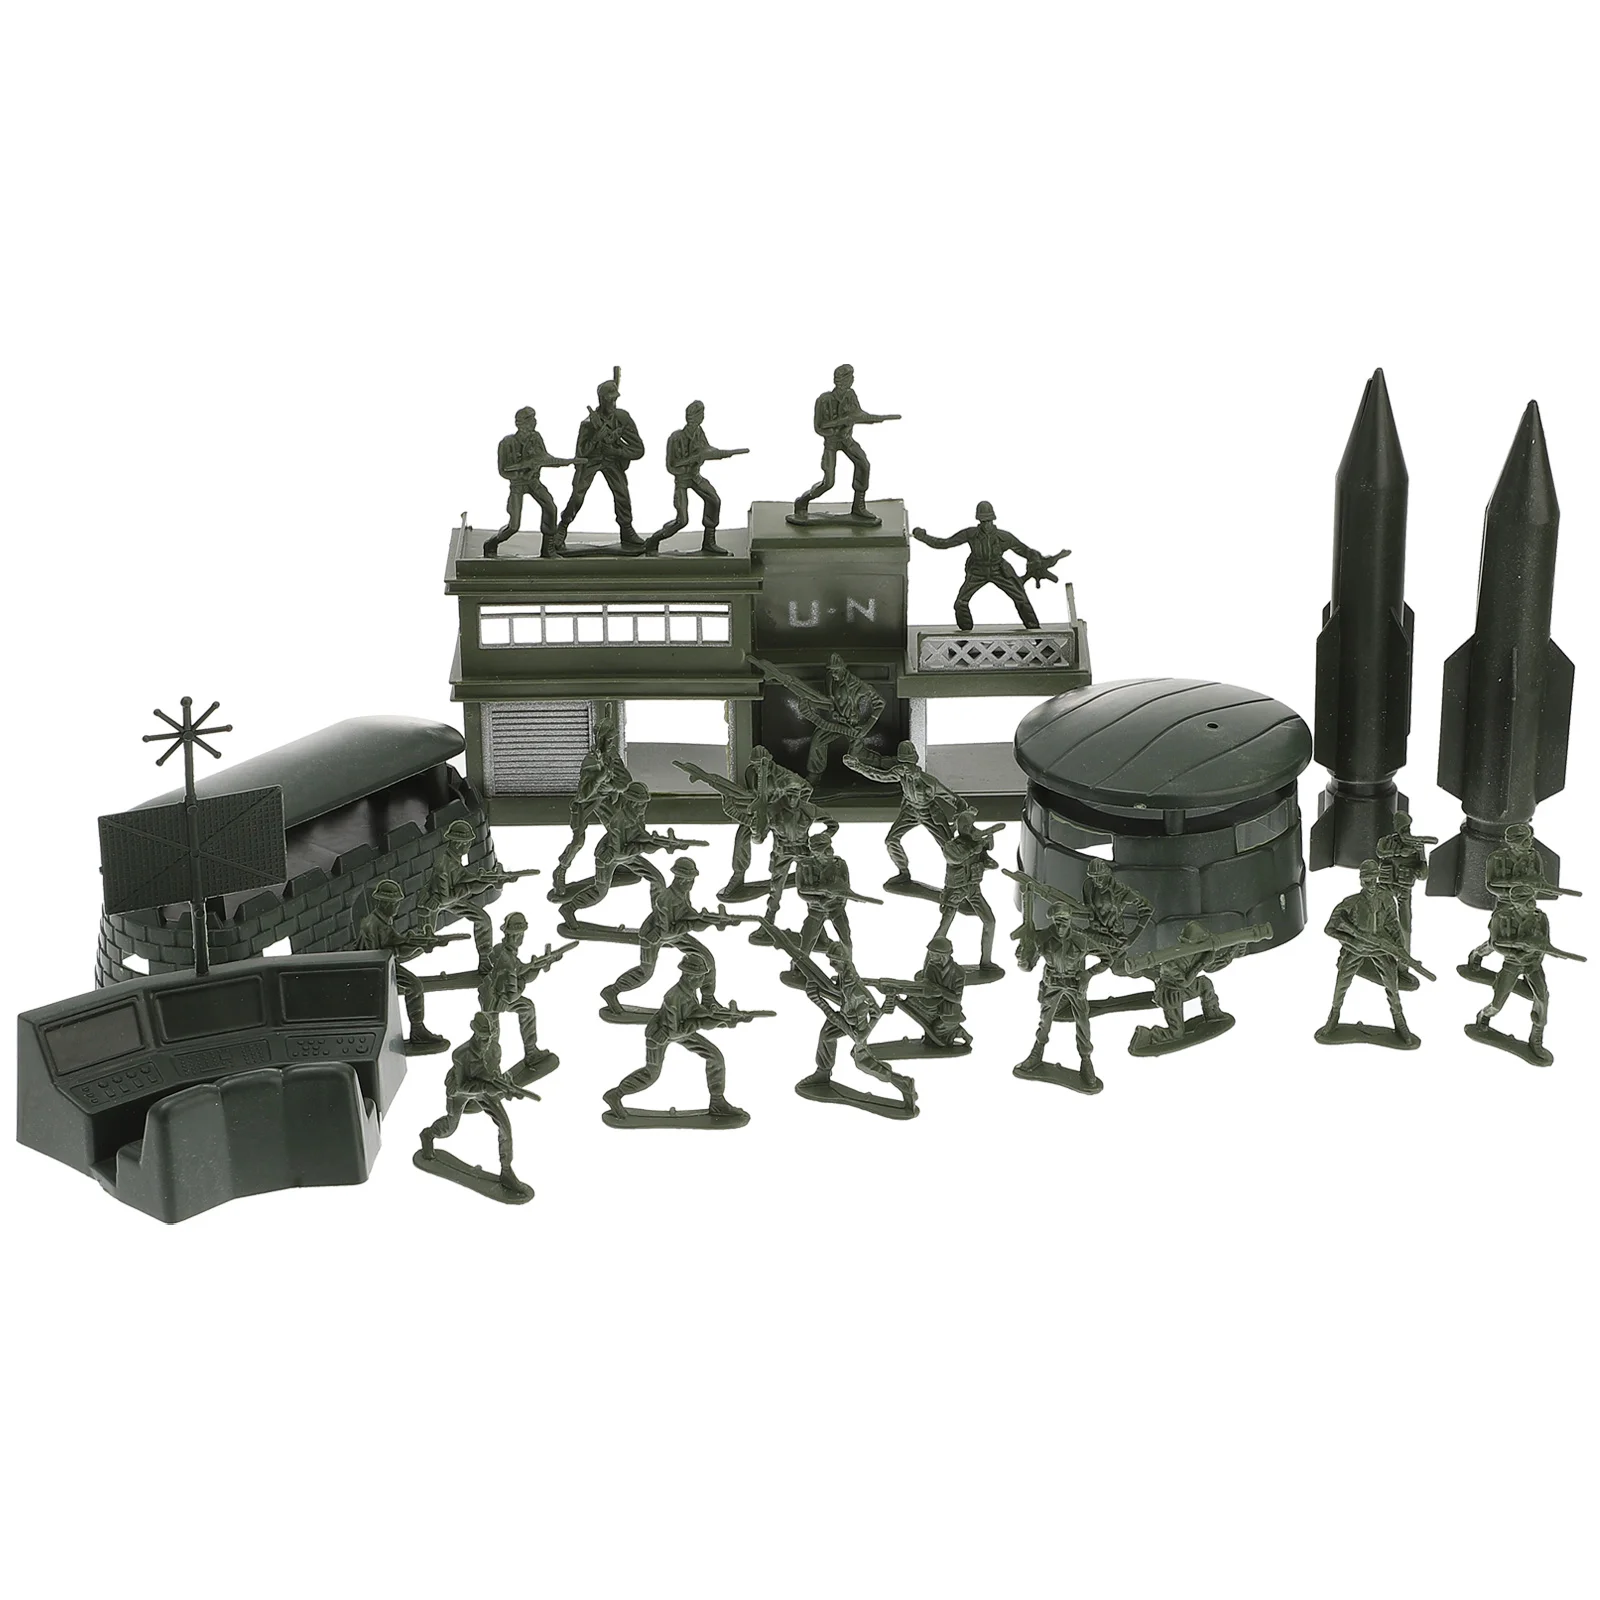 

56pcs Soldier Model Toys Funny Men Model Soldiers Playset Action Figures for Kids Children Play Birthday Party Favors Army